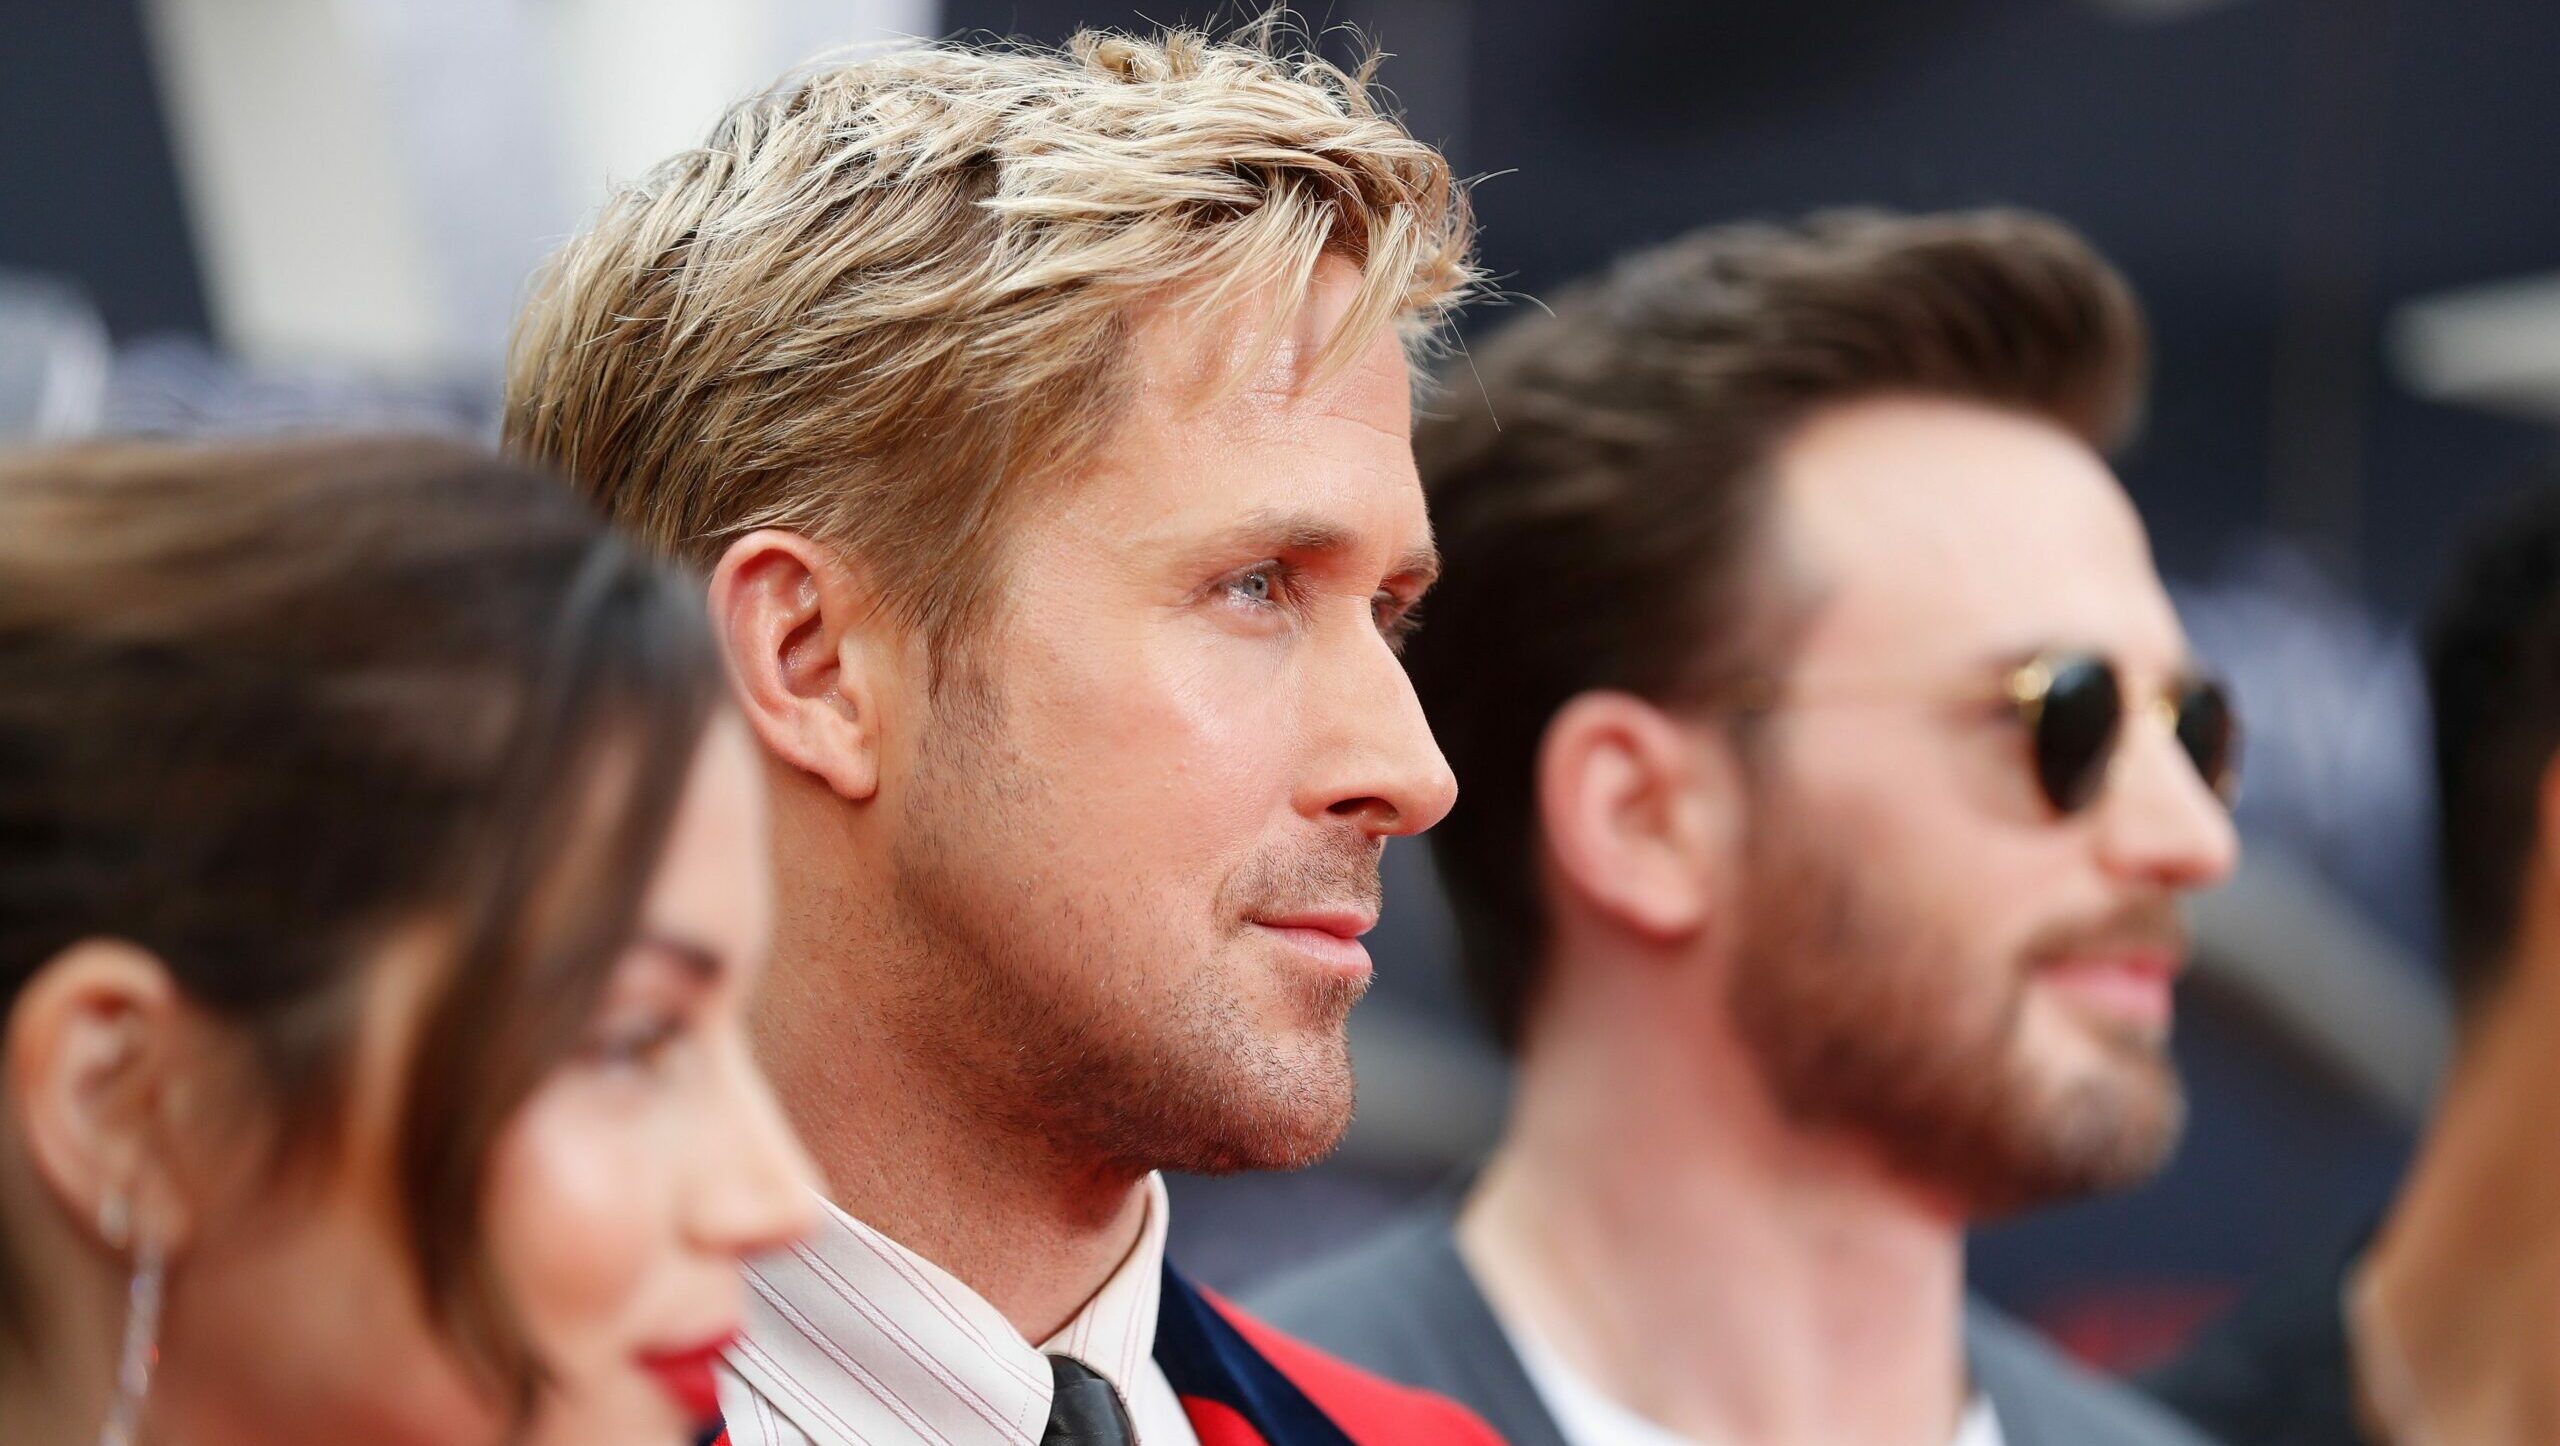 Ryan Gosling is a dad first